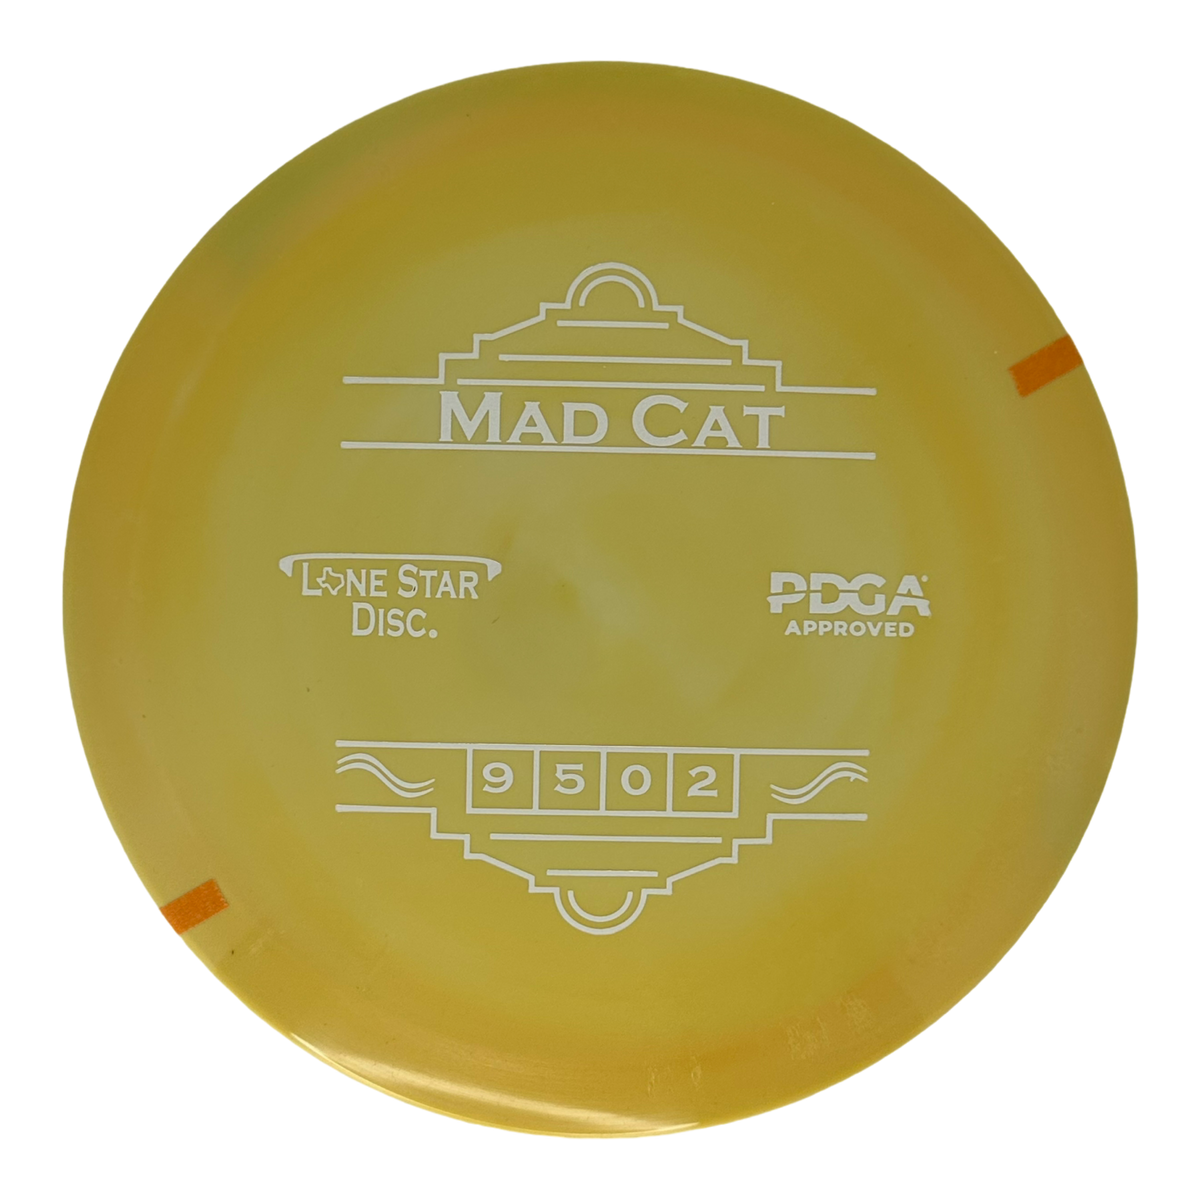 Lone Star Disc Lima Mad Cat